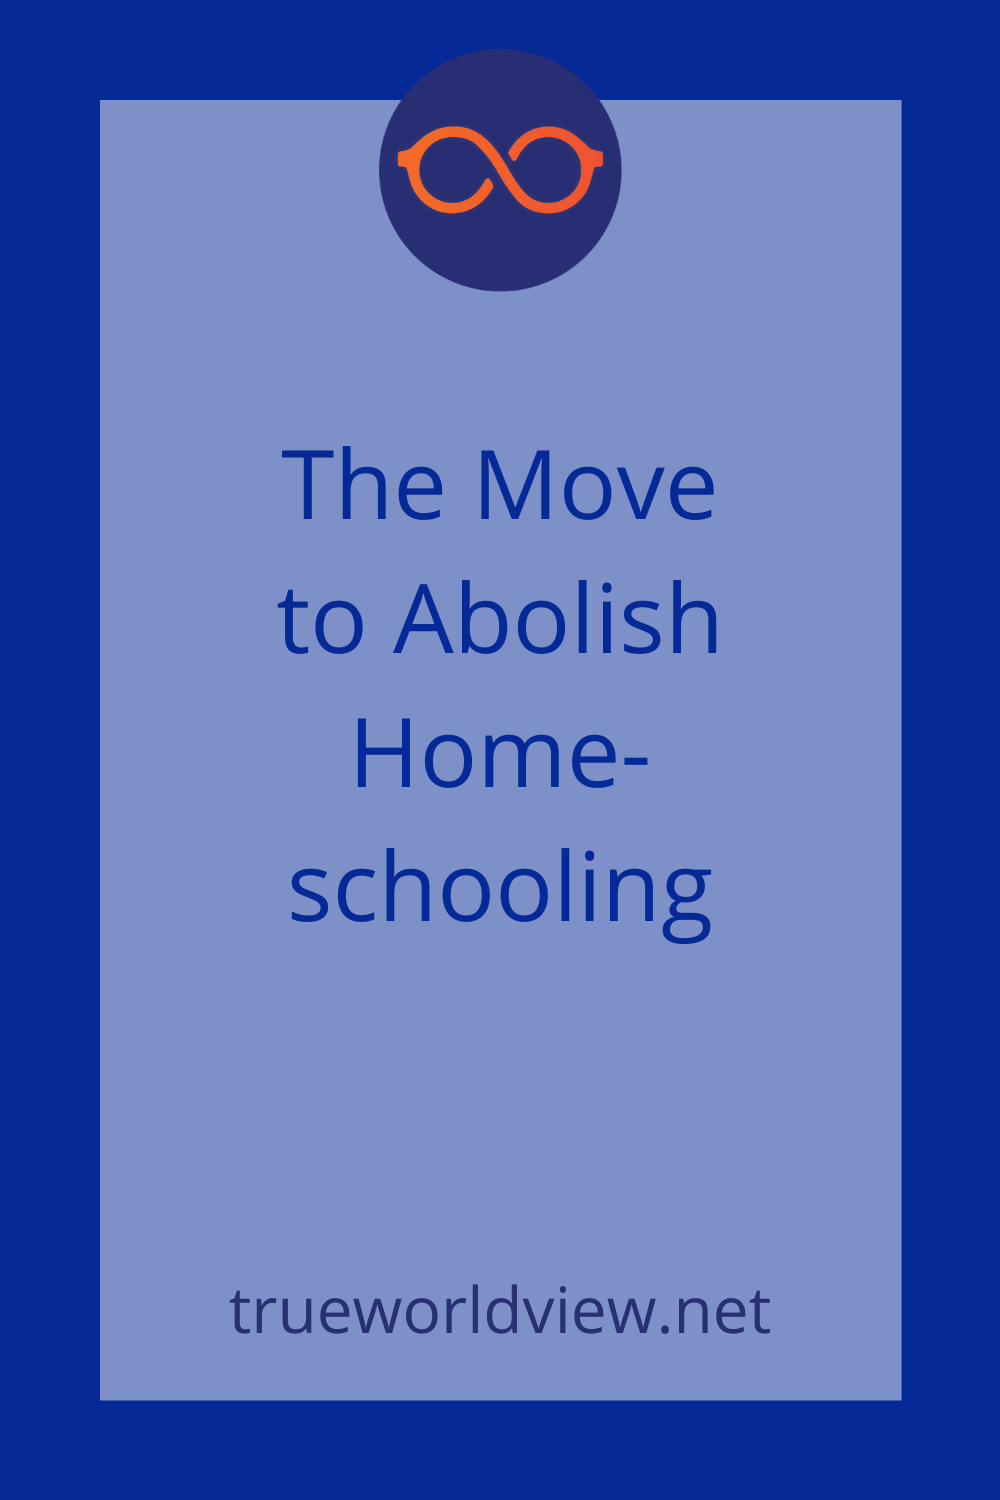 The Move to Abolish homeschooling